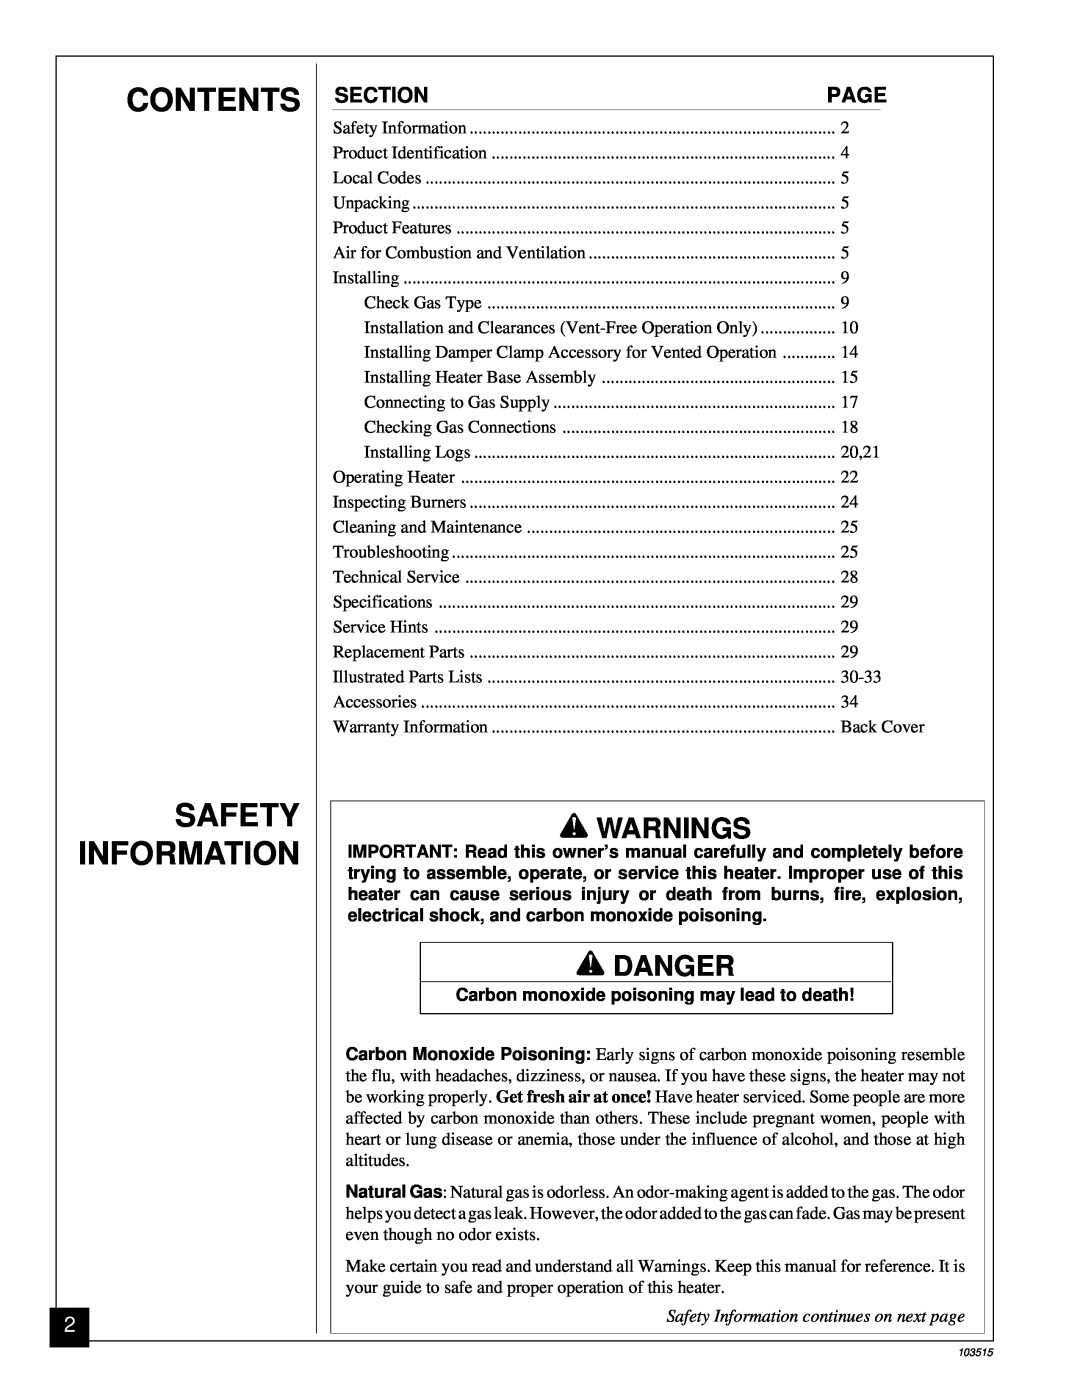 Vanguard Heating Gas Log Heater installation manual Contents Safety Information, Warnings, Danger, Section, Page 